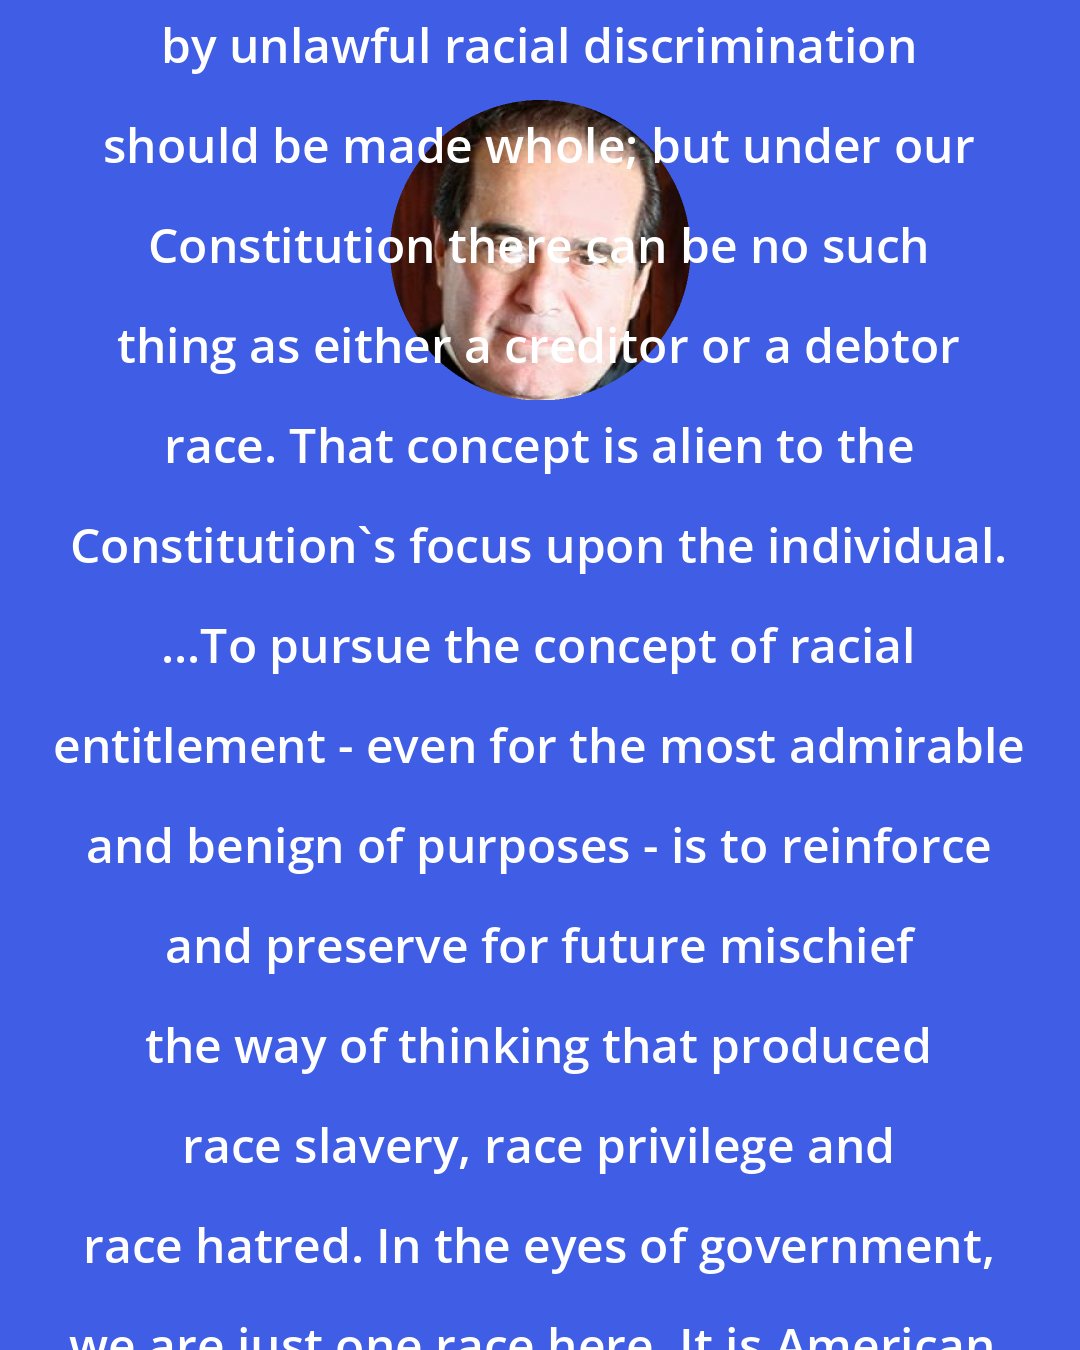 Antonin Scalia: Individuals who have been wronged by unlawful racial discrimination should be made whole; but under our Constitution there can be no such thing as either a creditor or a debtor race. That concept is alien to the Constitution's focus upon the individual. ...To pursue the concept of racial entitlement - even for the most admirable and benign of purposes - is to reinforce and preserve for future mischief the way of thinking that produced race slavery, race privilege and race hatred. In the eyes of government, we are just one race here. It is American.